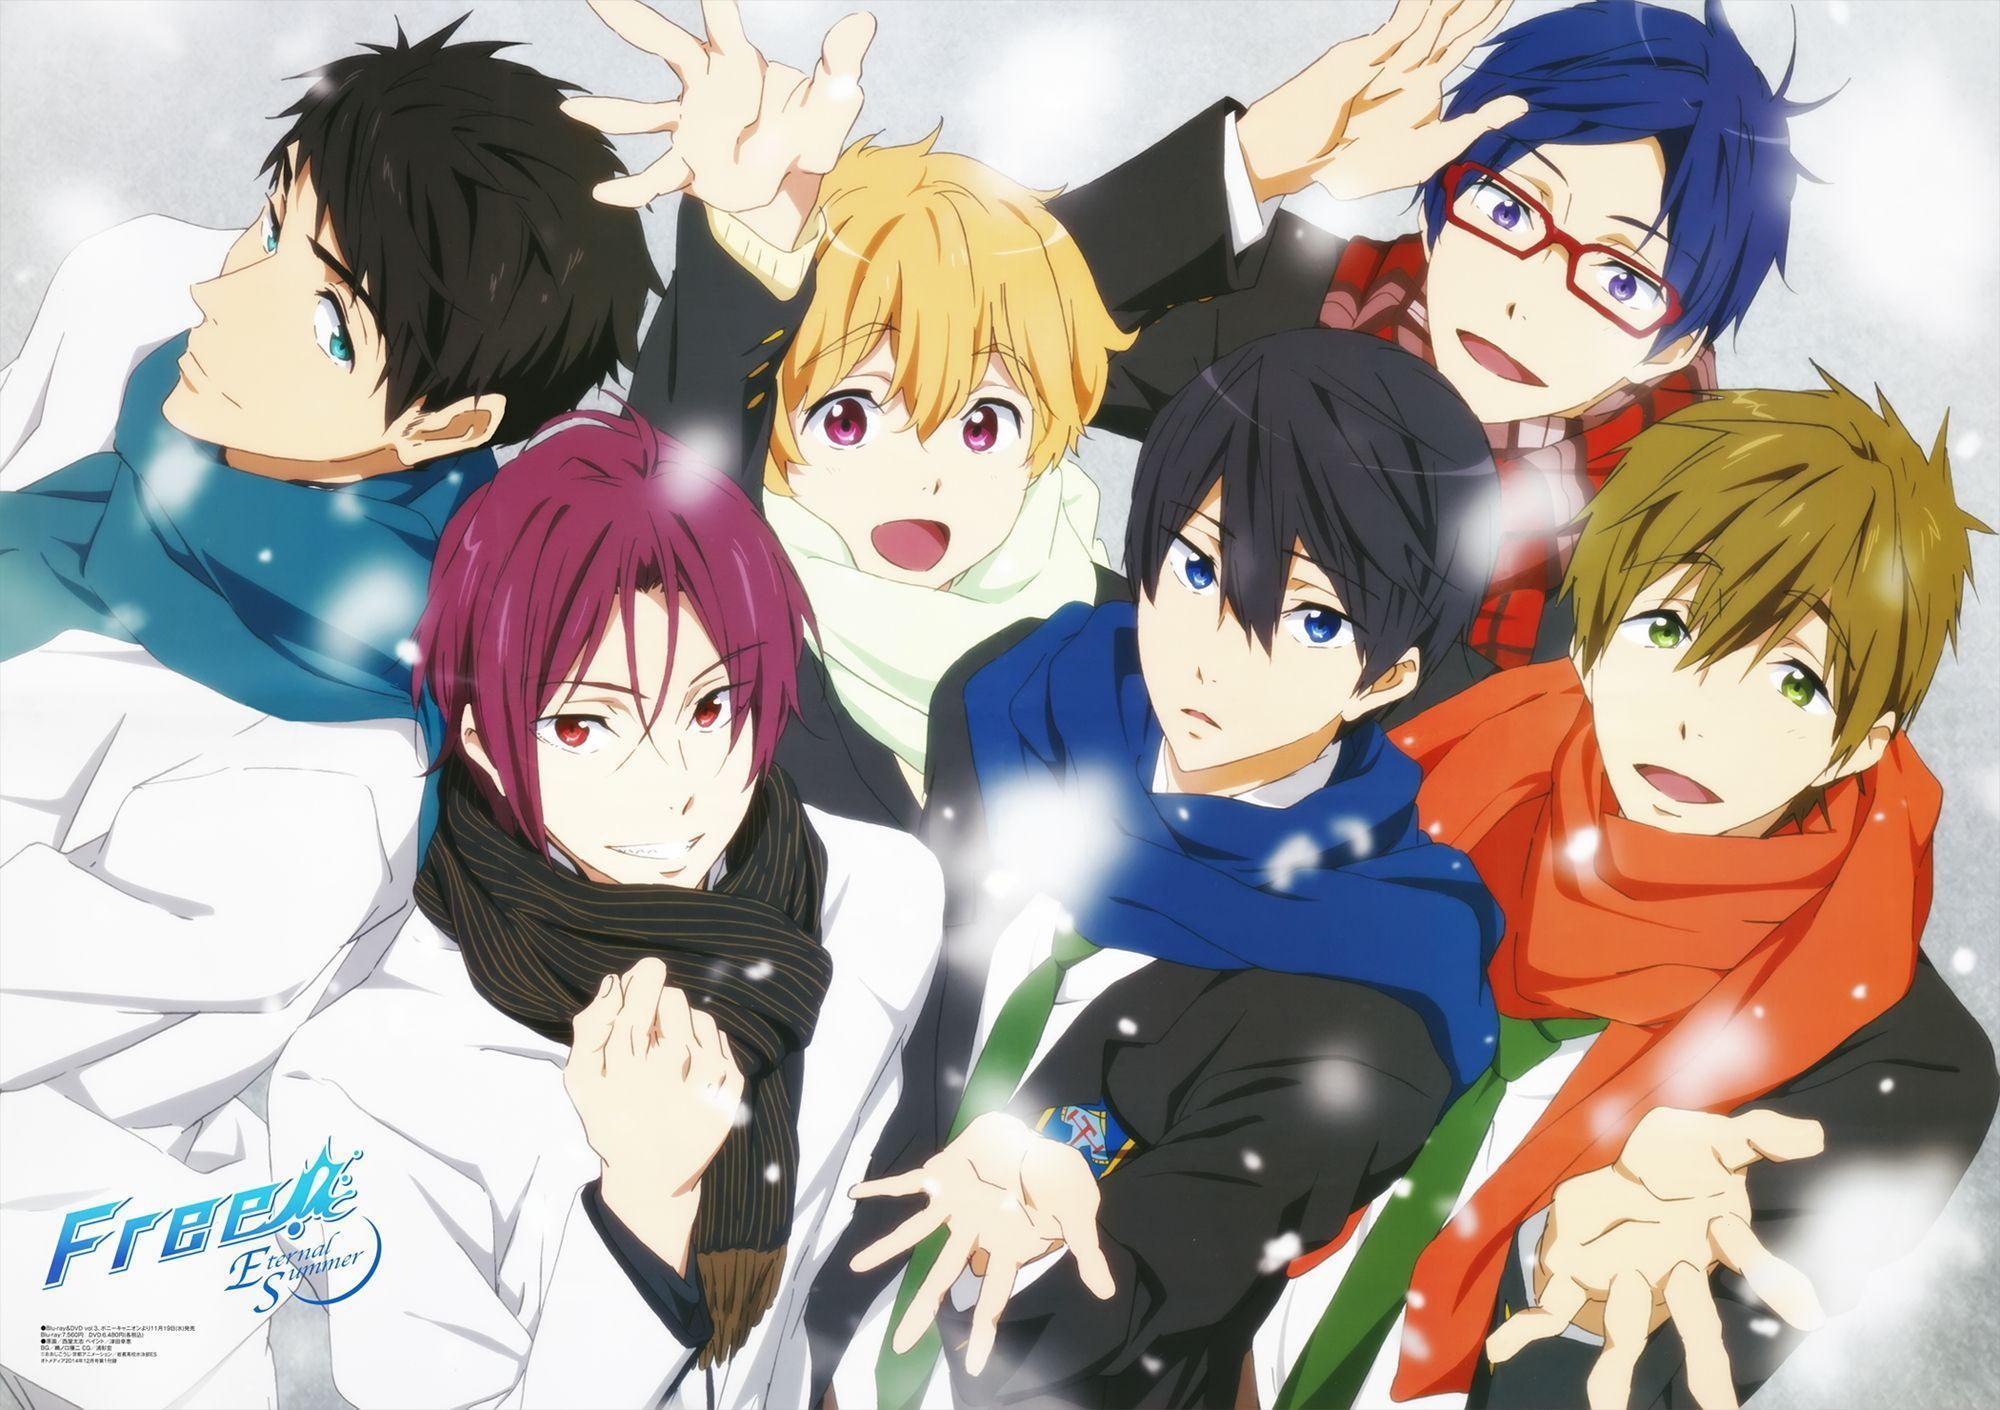 Free! HD Wallpaper and Background Image